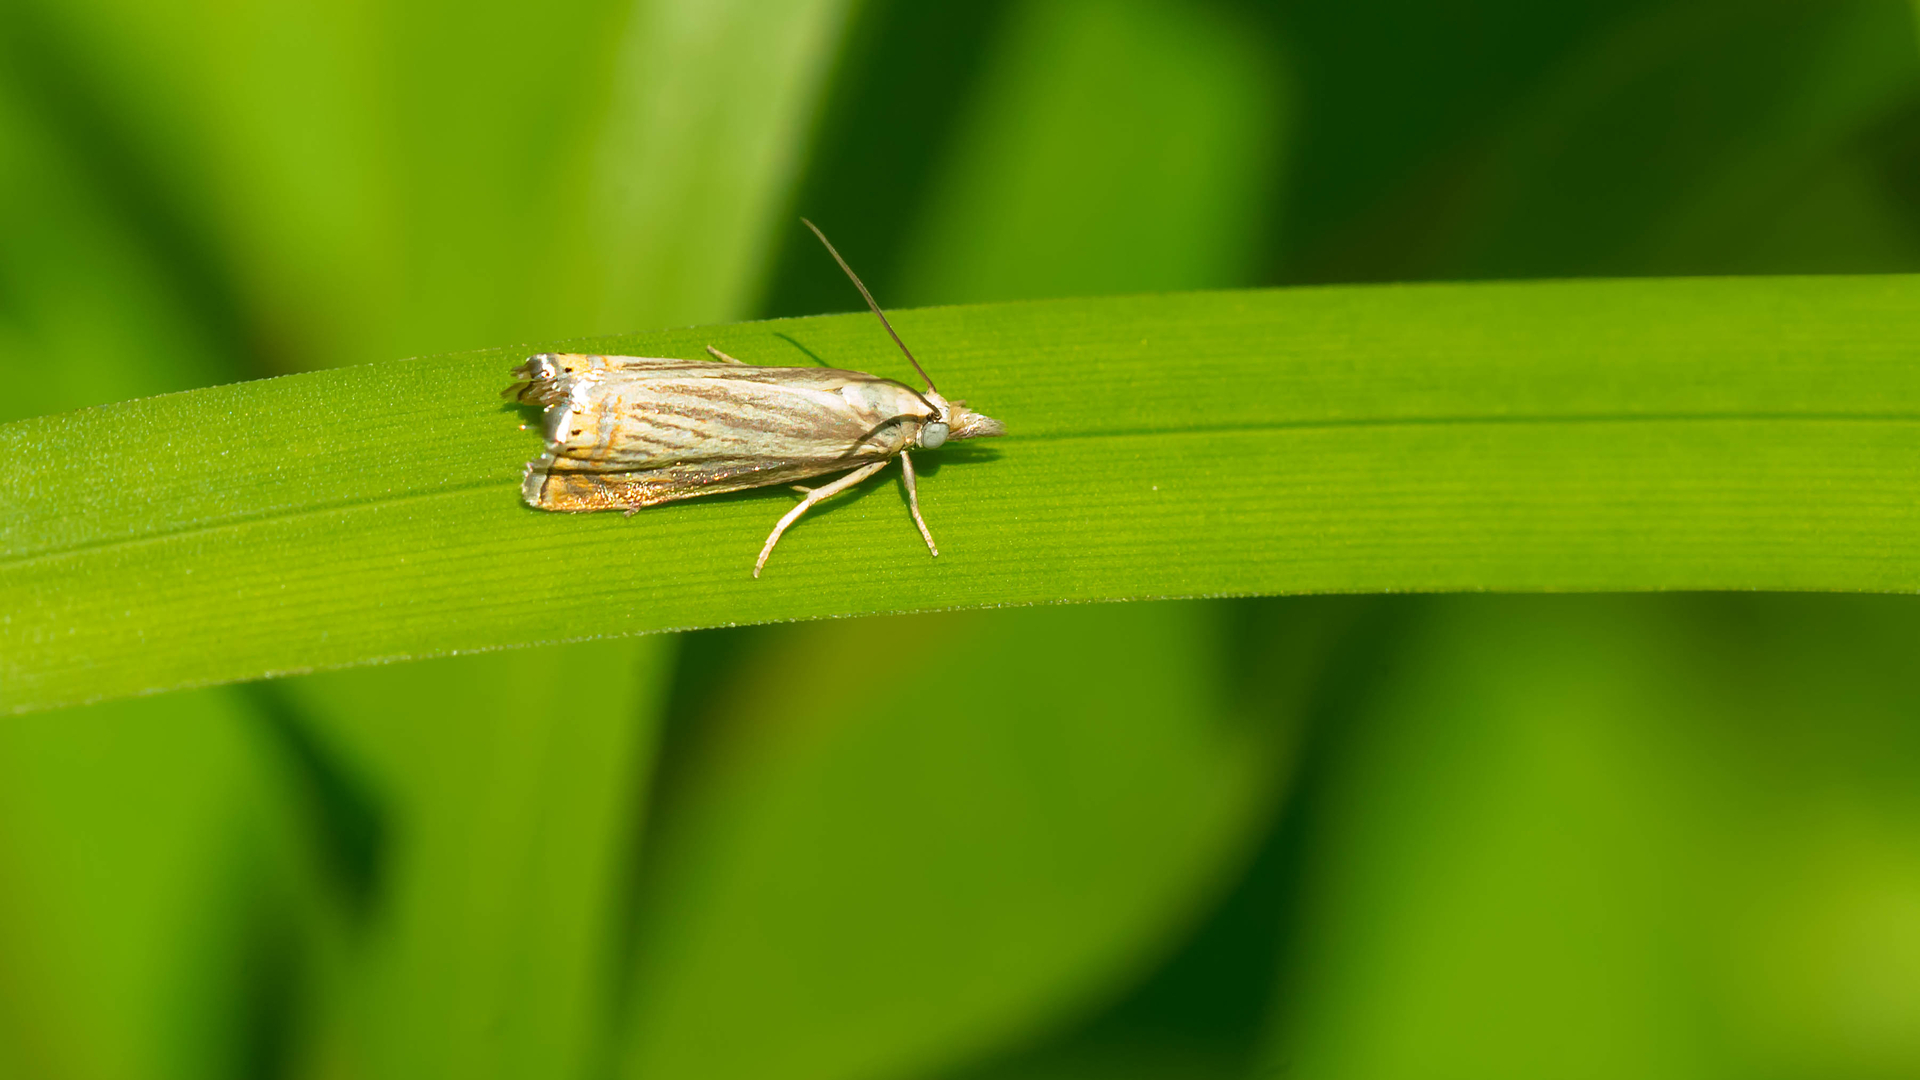 Don’t Let Sod Webworms Destroy Your Turf! Here’s How to Deal With Them!